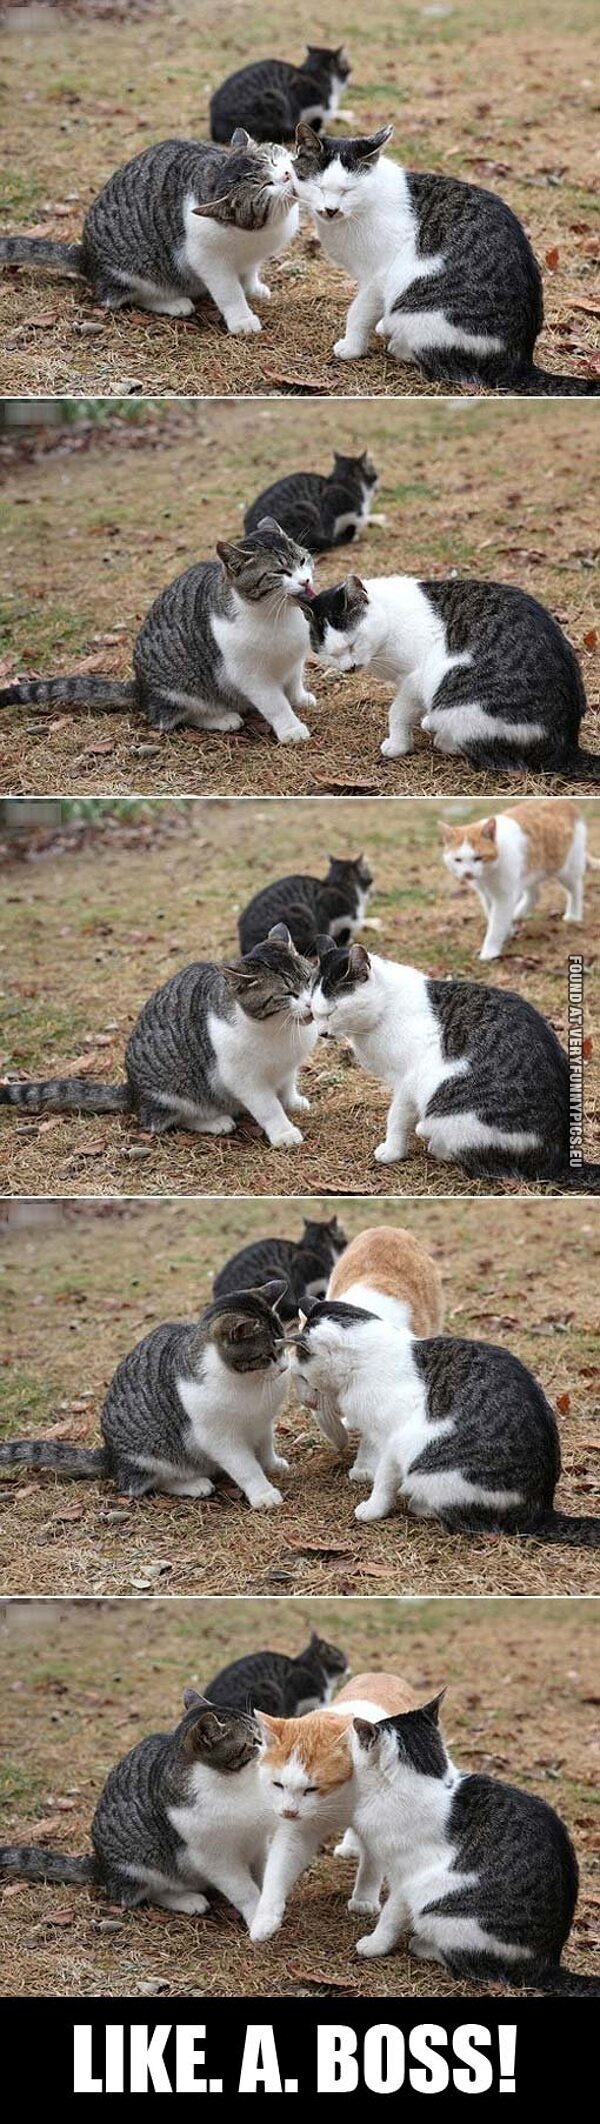 Funny Picture - Cat goes between two other cats - Like a boss